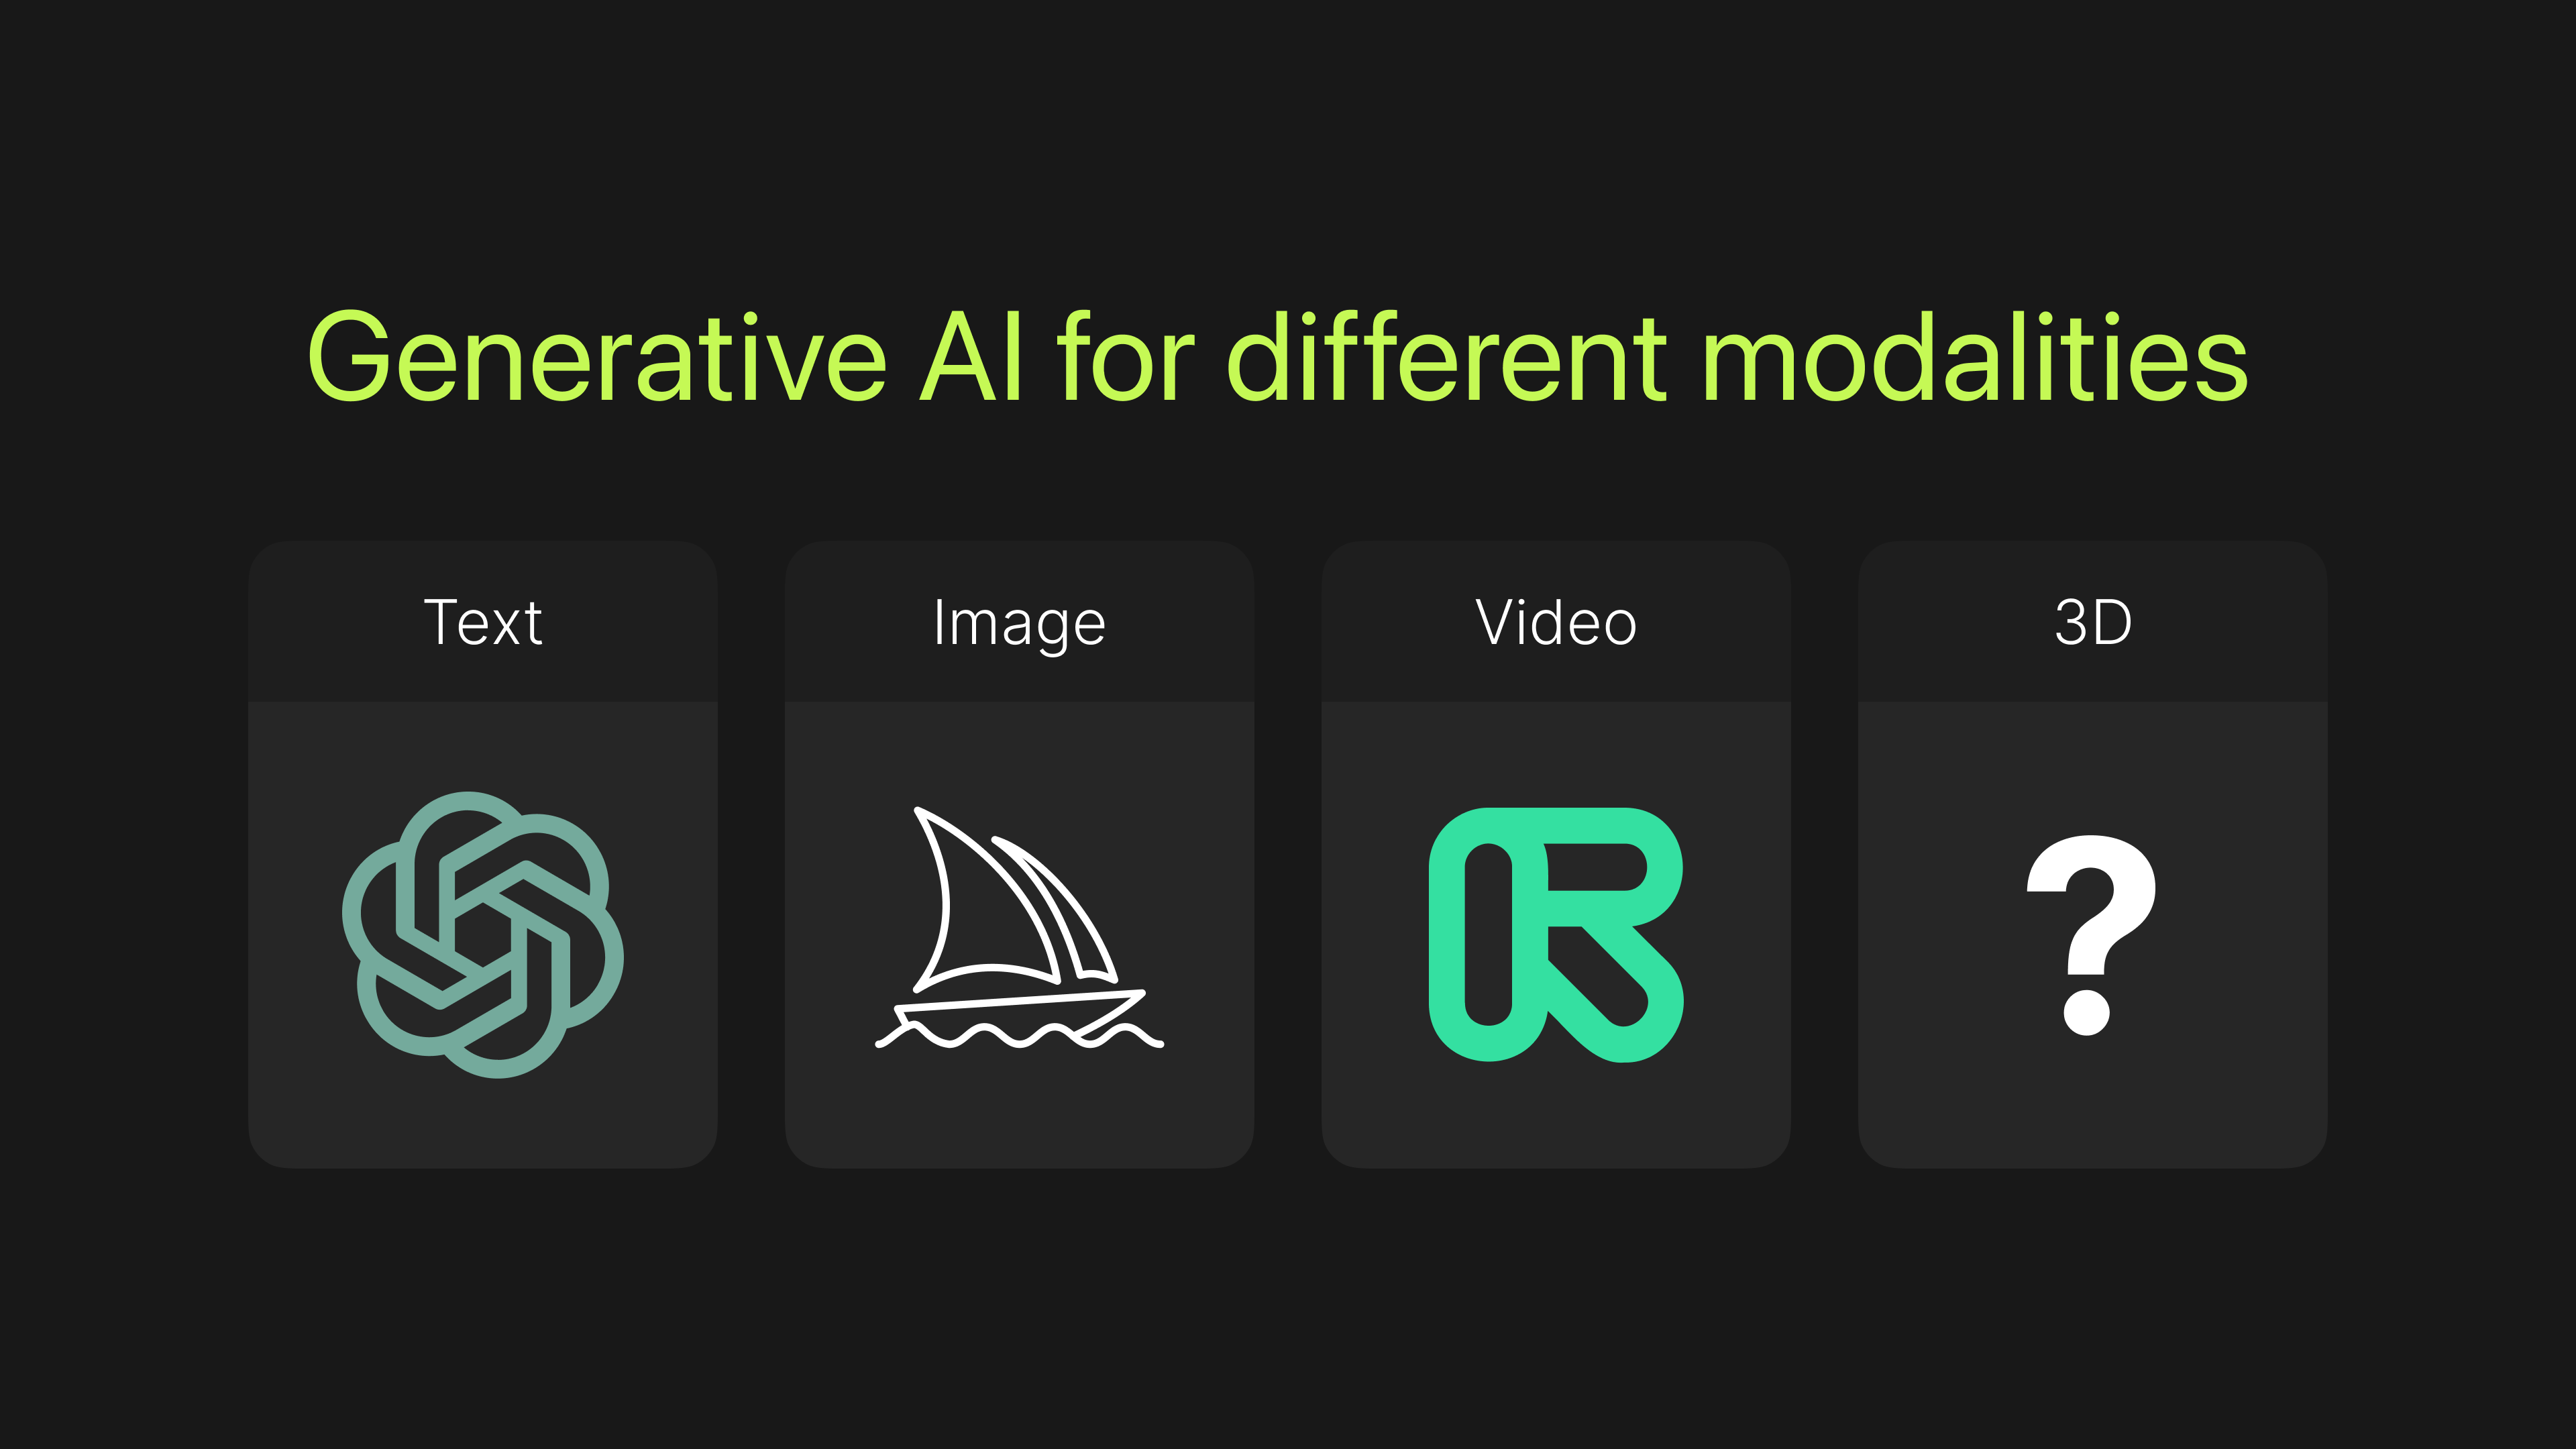 Different modalities of generative AI products, from text, image to video, and maybe to 3d?